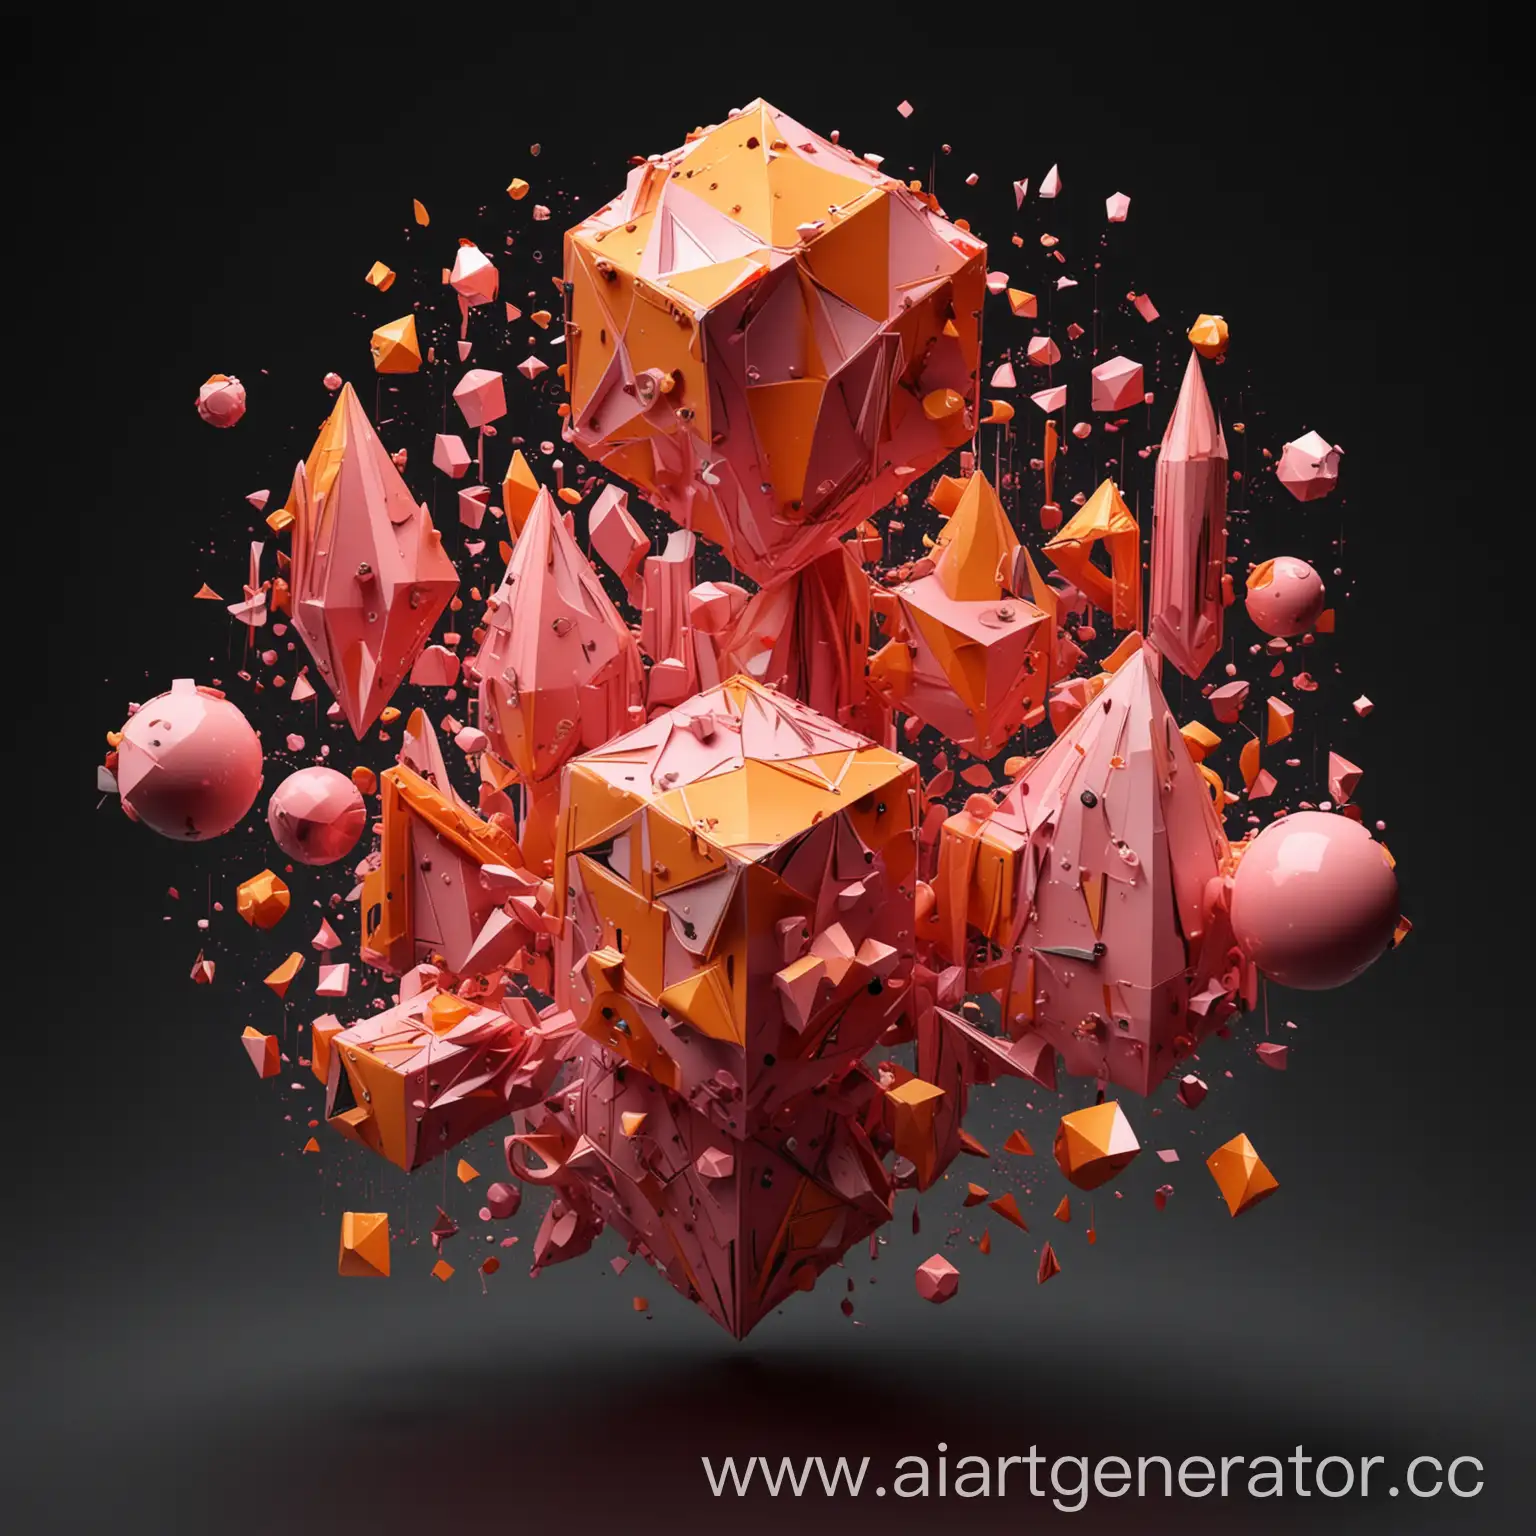 Abstract-Orange-and-Pink-Geometric-3D-Figures-and-Patterns-on-Black-Background